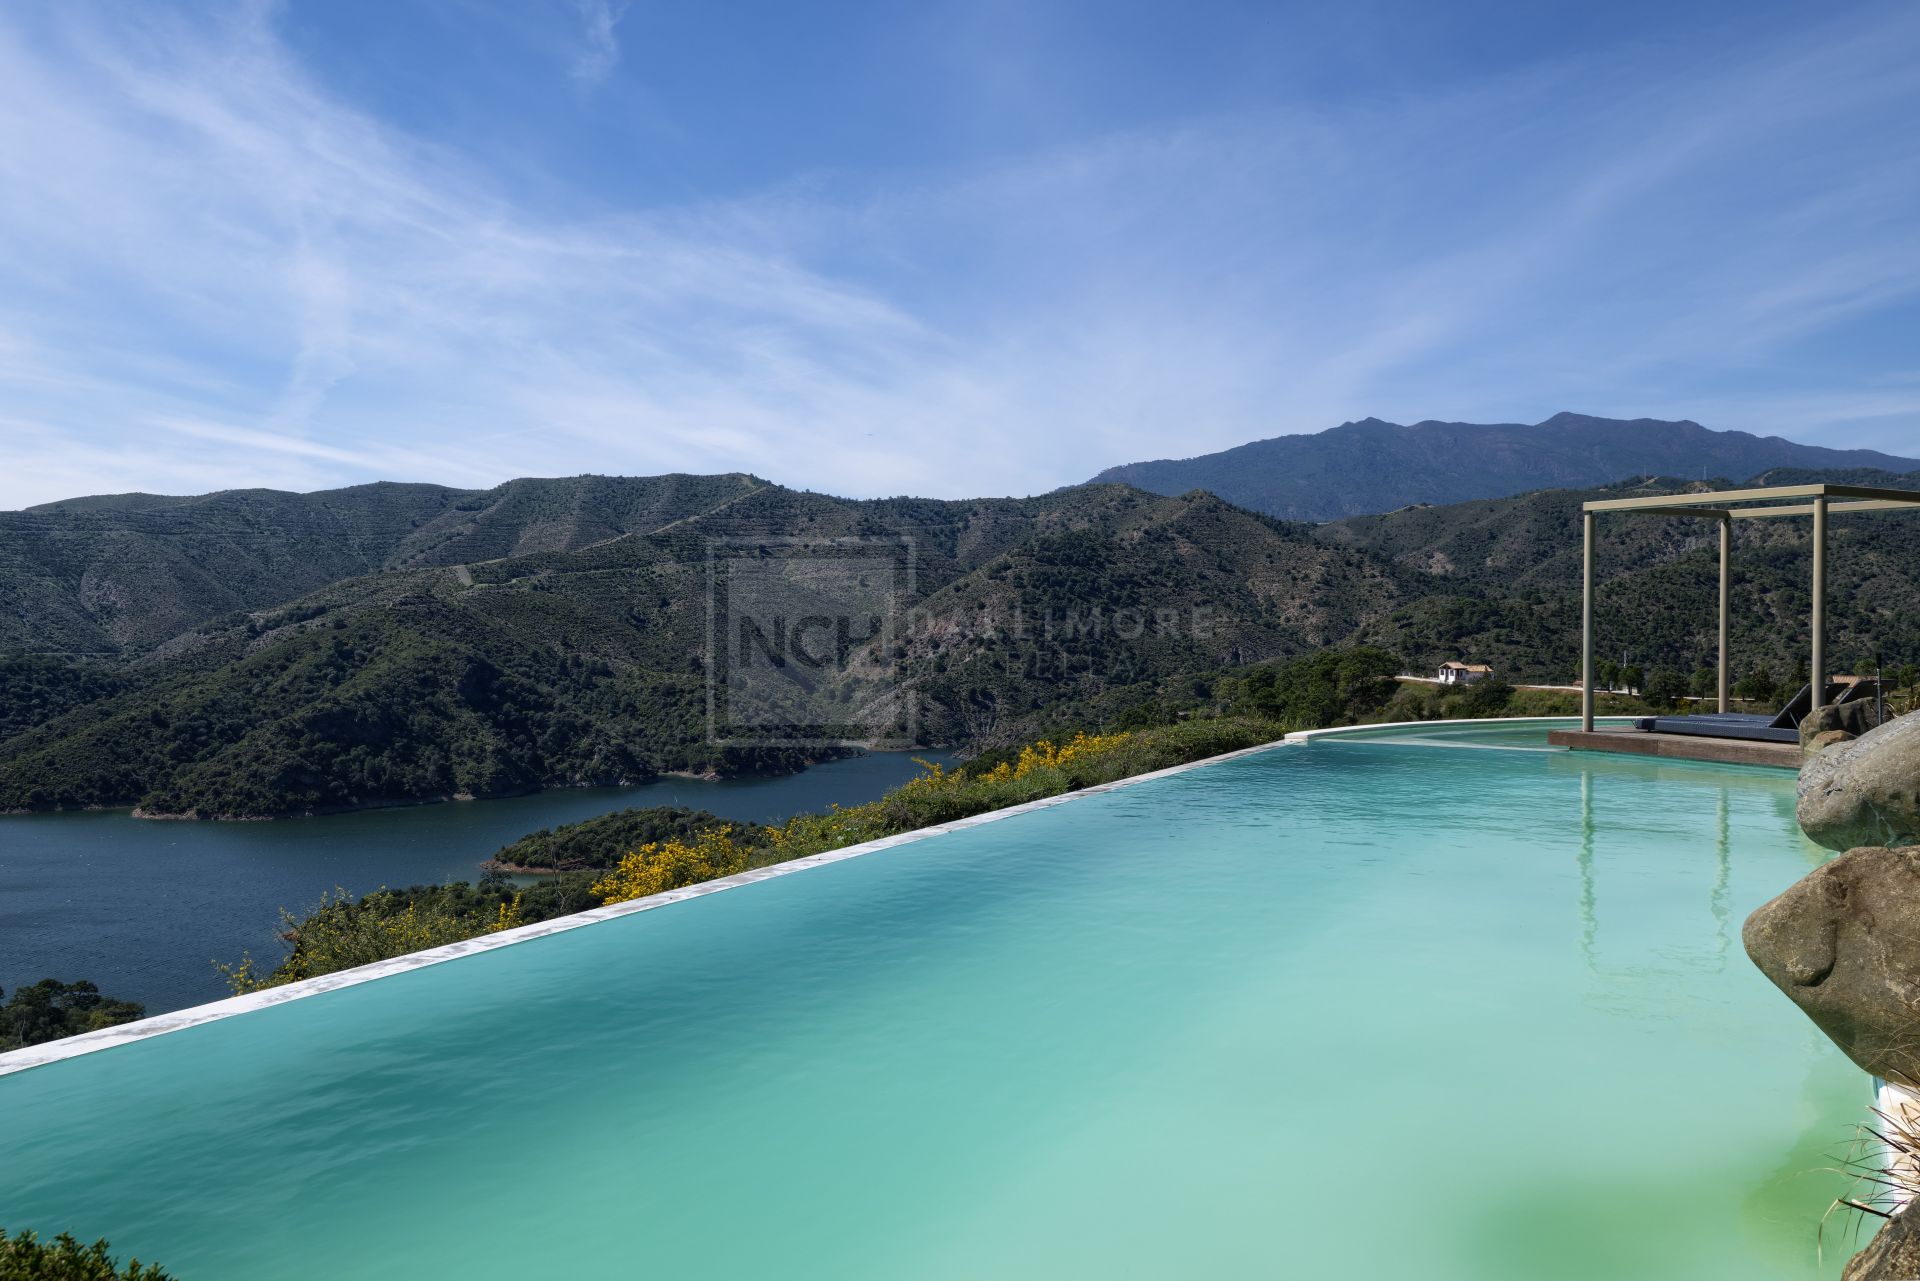 UNIQUE 5 BEDROOM CONTEMPORARY VILLA WITH STUNNING LAKE VIEW, ISTAN